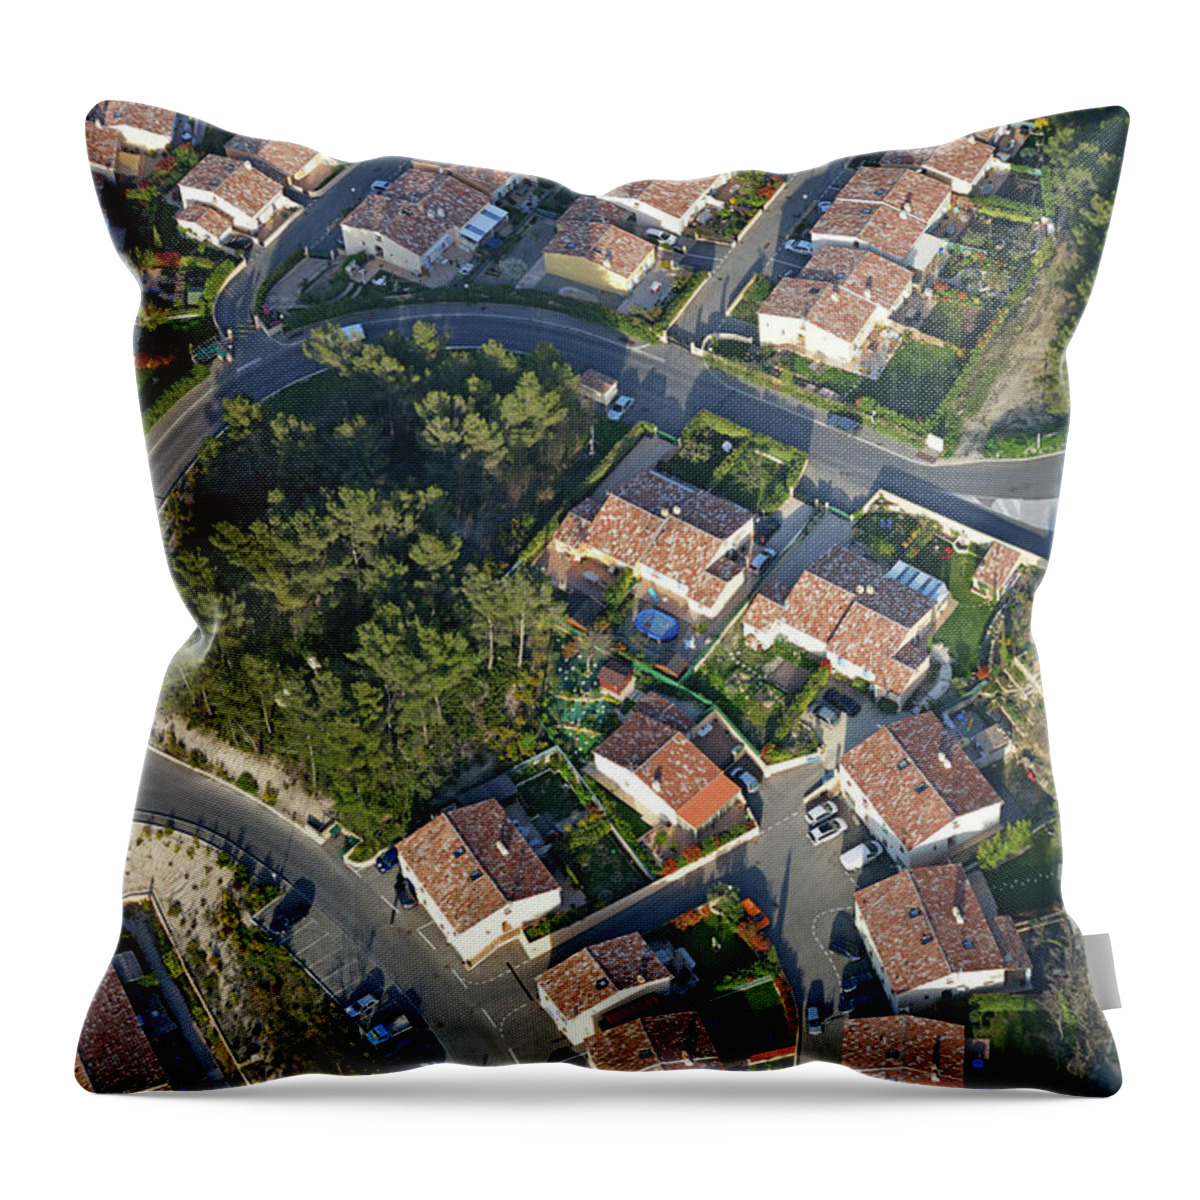 Tranquility Throw Pillow featuring the photograph Housing Development, Peypin, Aerial View by Sami Sarkis